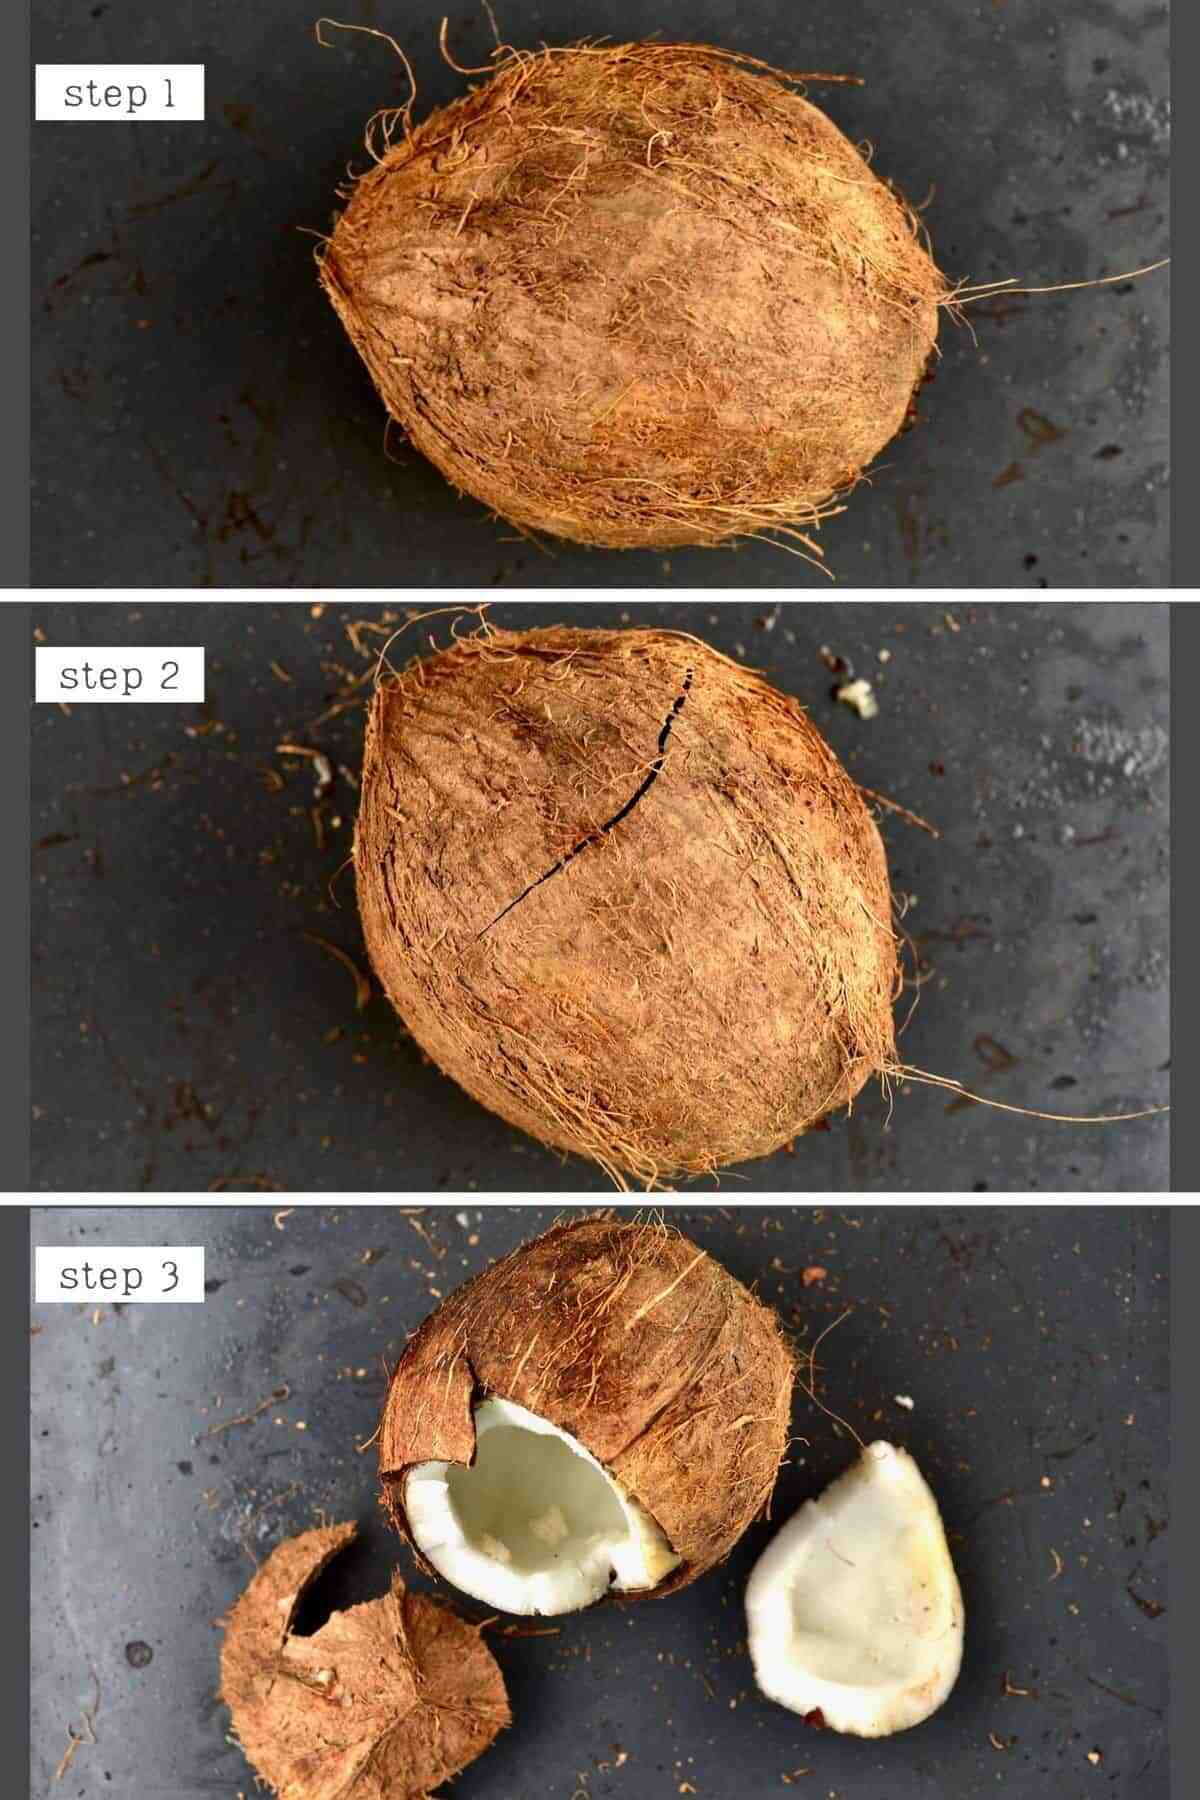 How do you open a coconut hole?